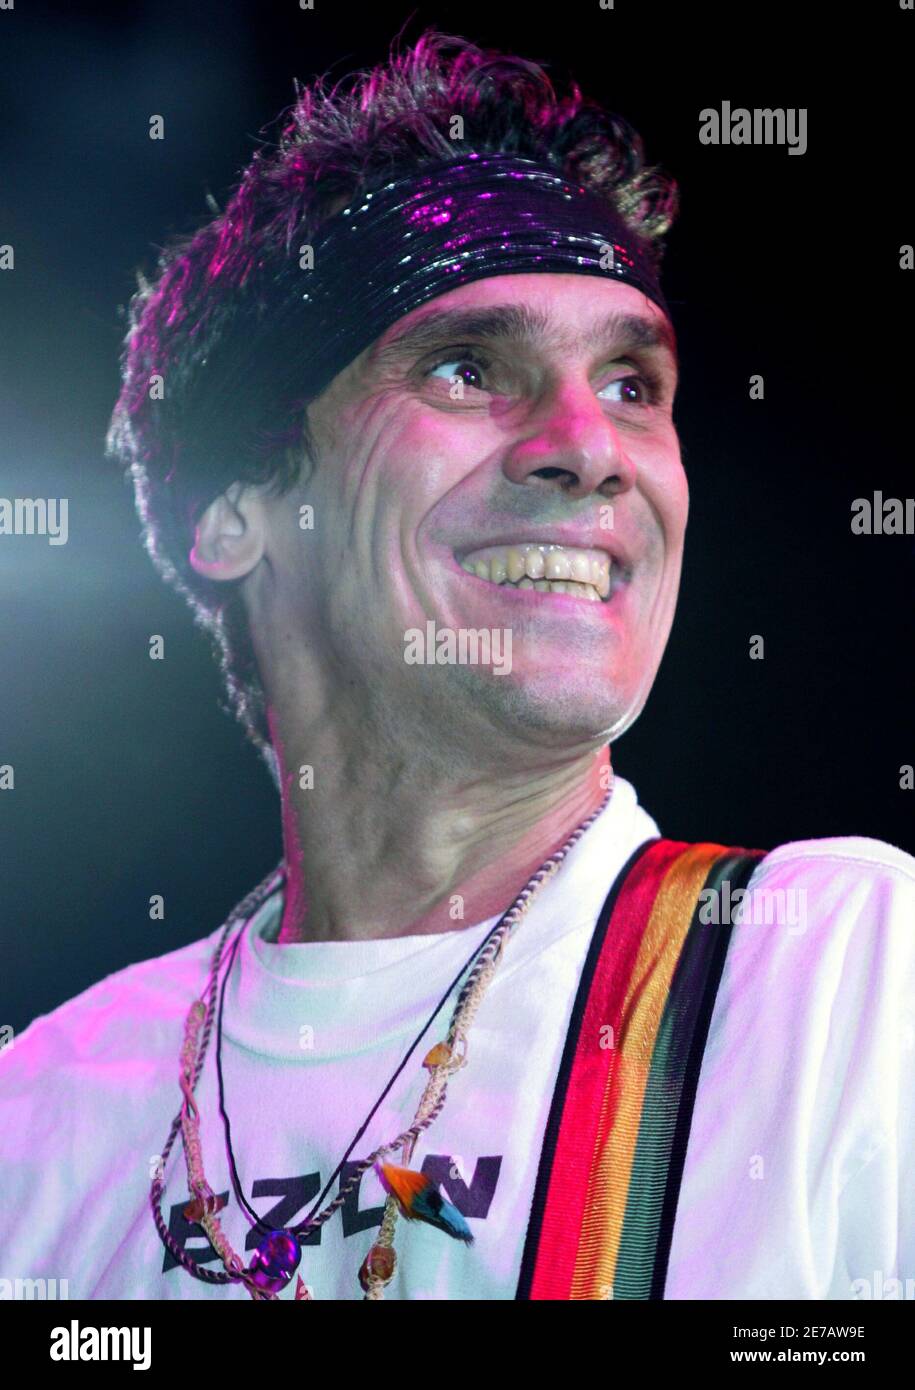 French singer Manu Chao performs with his band Radio Bemba Sound System  during a free open-air concert at Zocalo square in Mexico City March 26,  2006. Chao is in Mexico as part